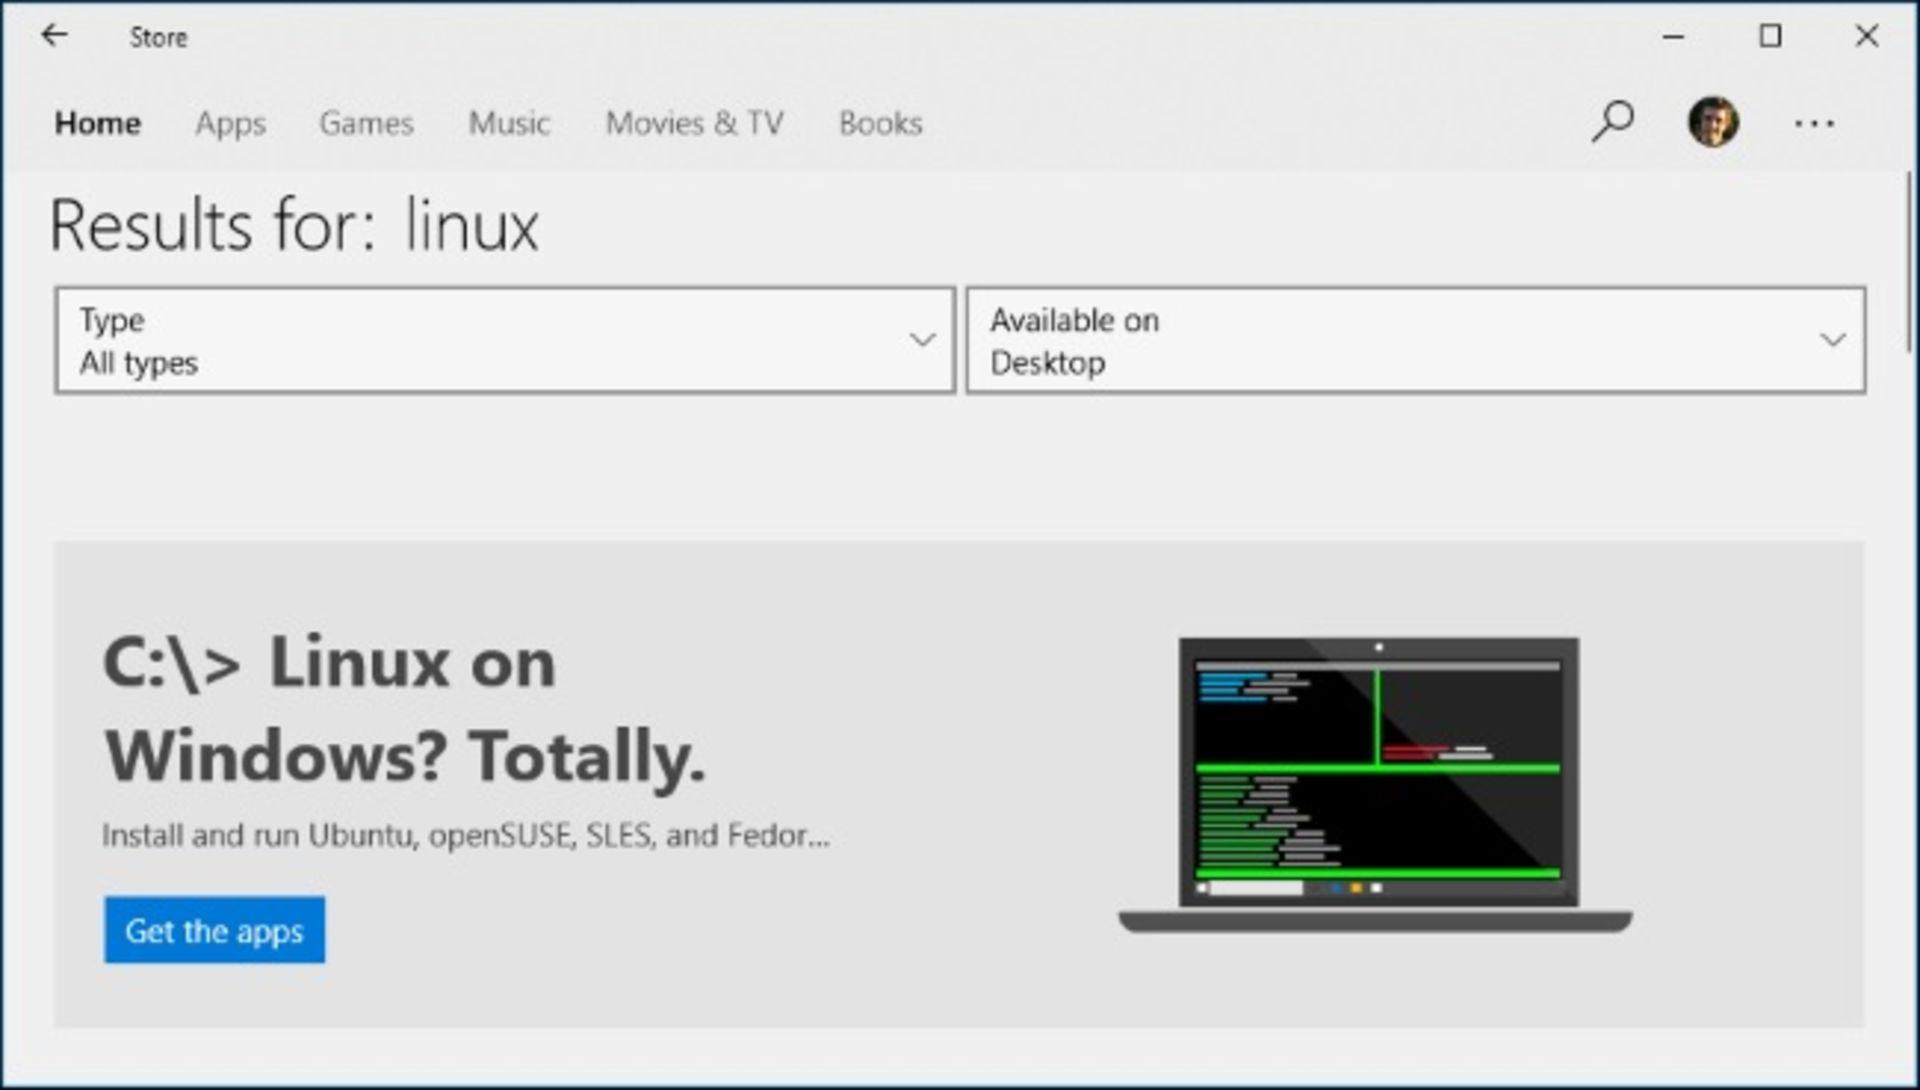 Linux Distributions on Microsoft Store